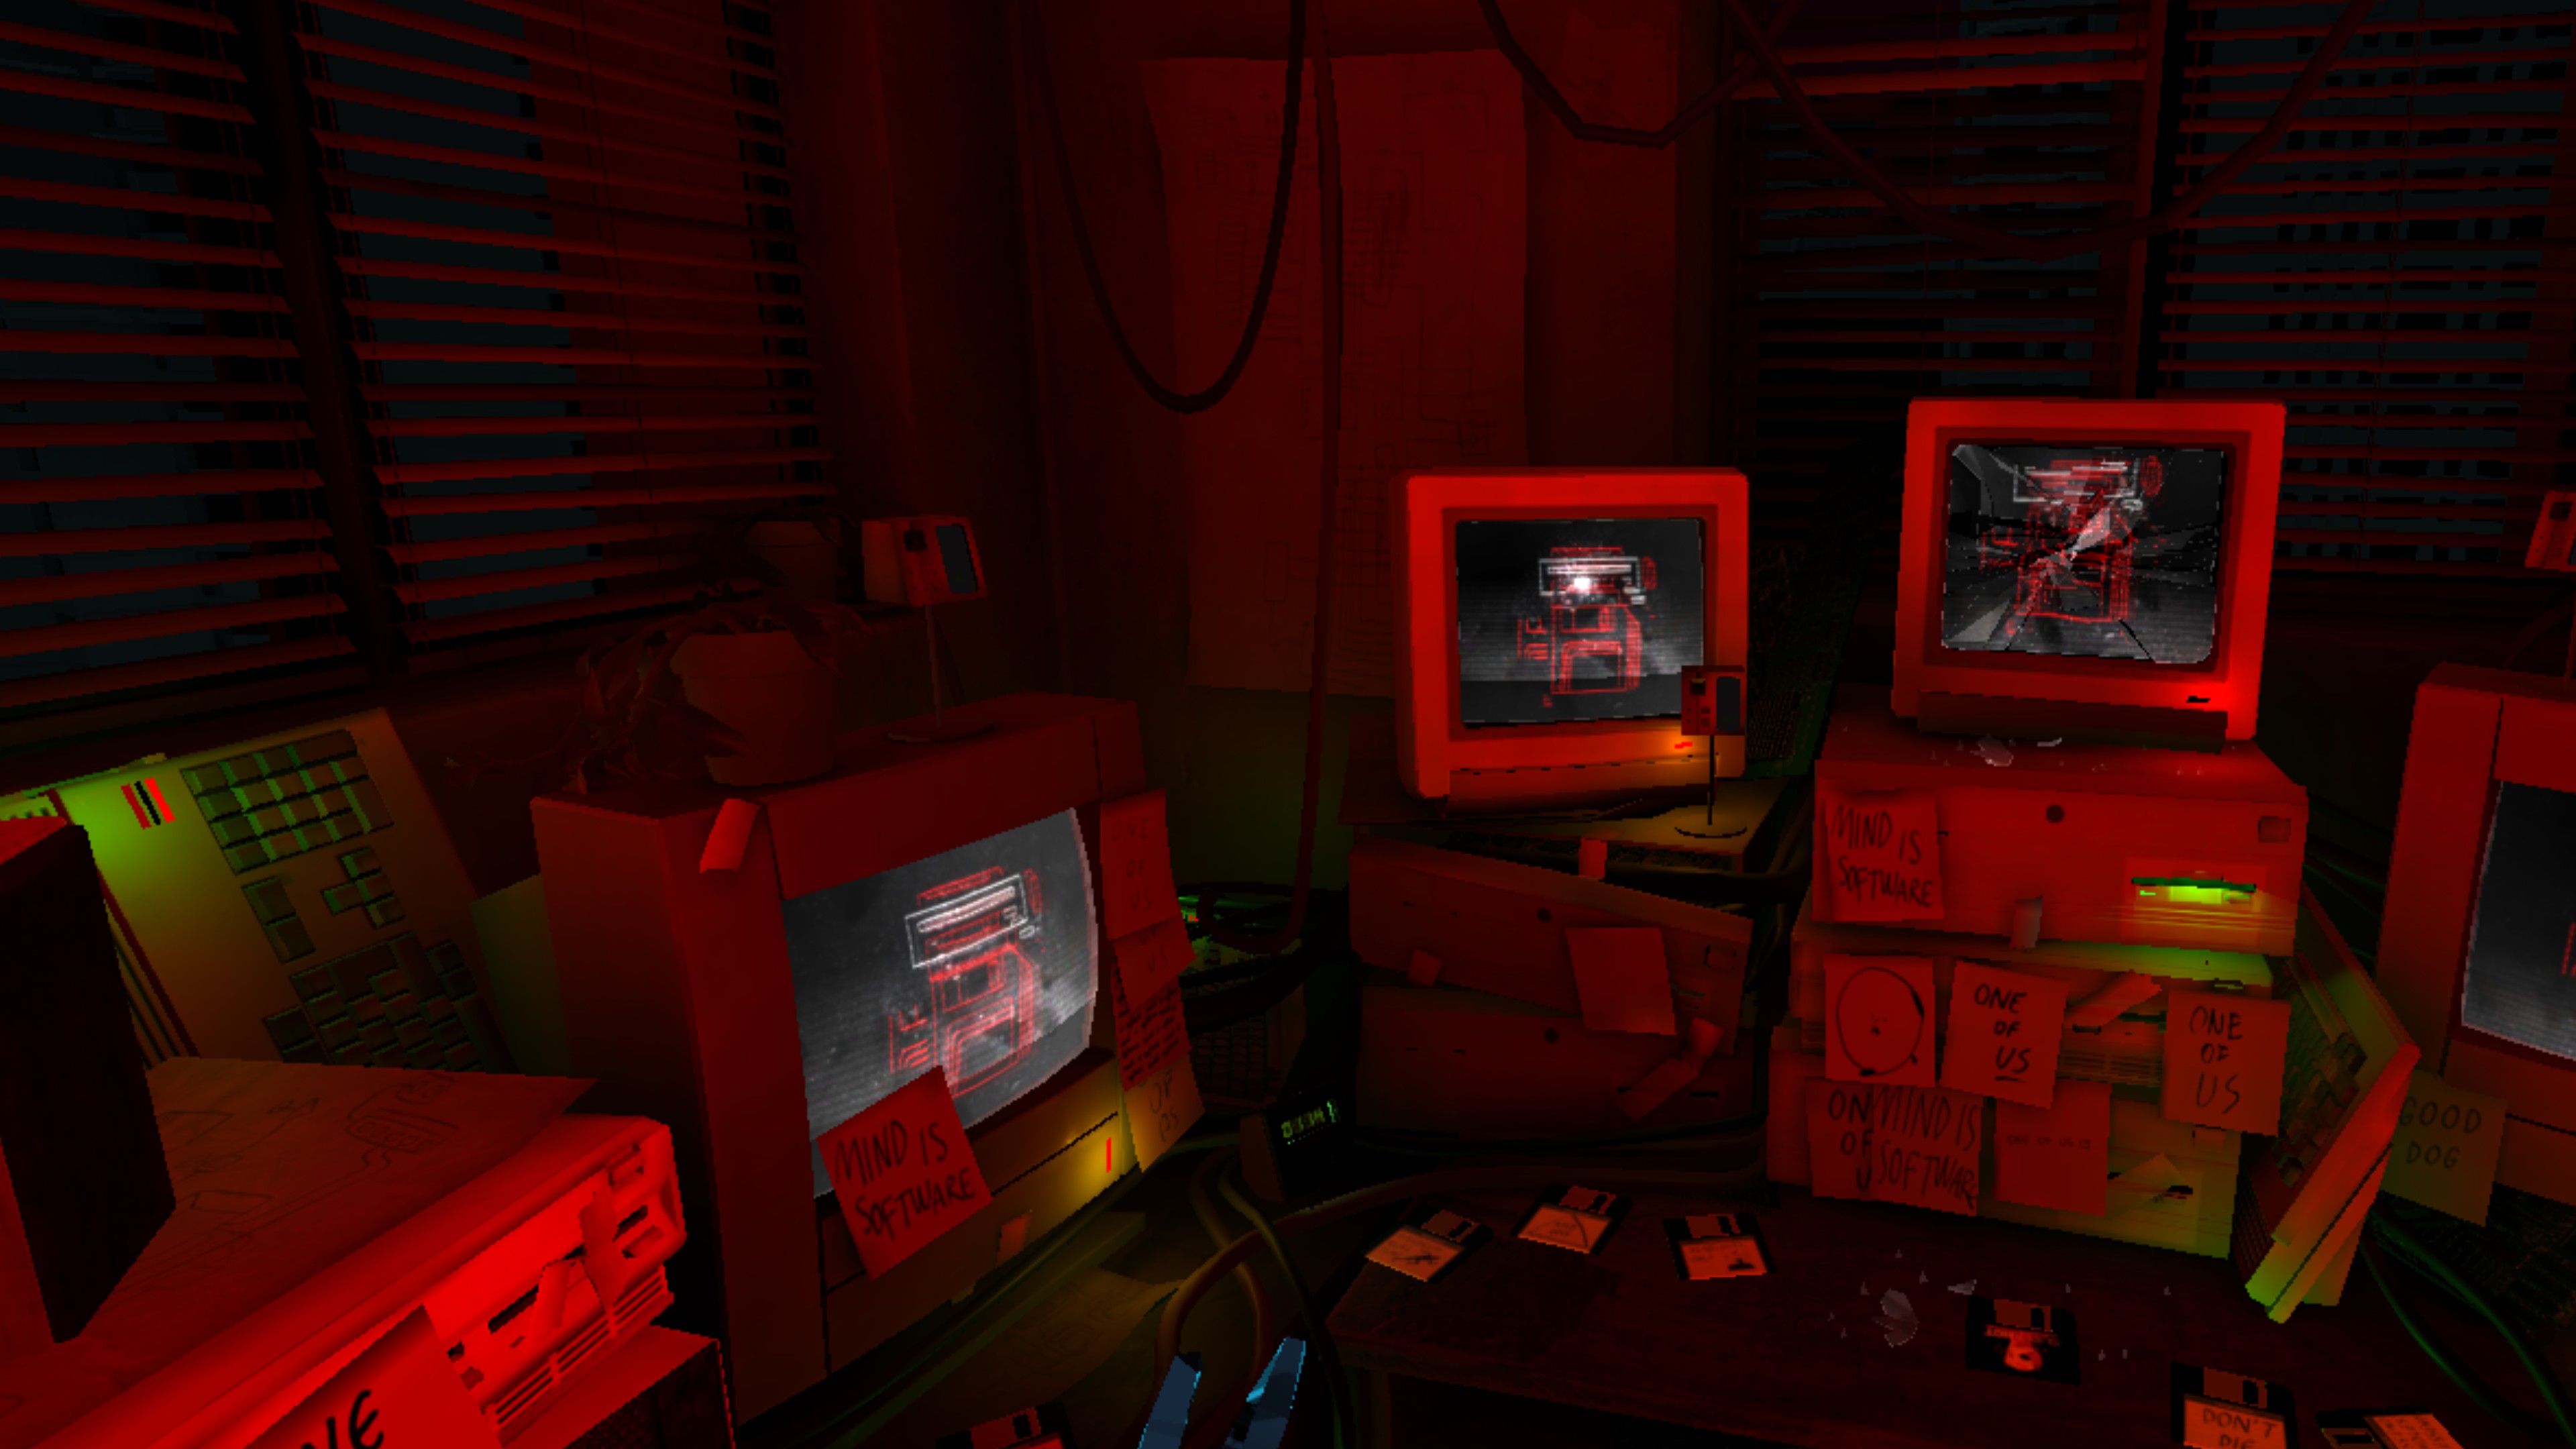 Your virtual home in Superhot VR, where you use floppies to load levels and then don a virtual reality headset (virtual virtual reality).